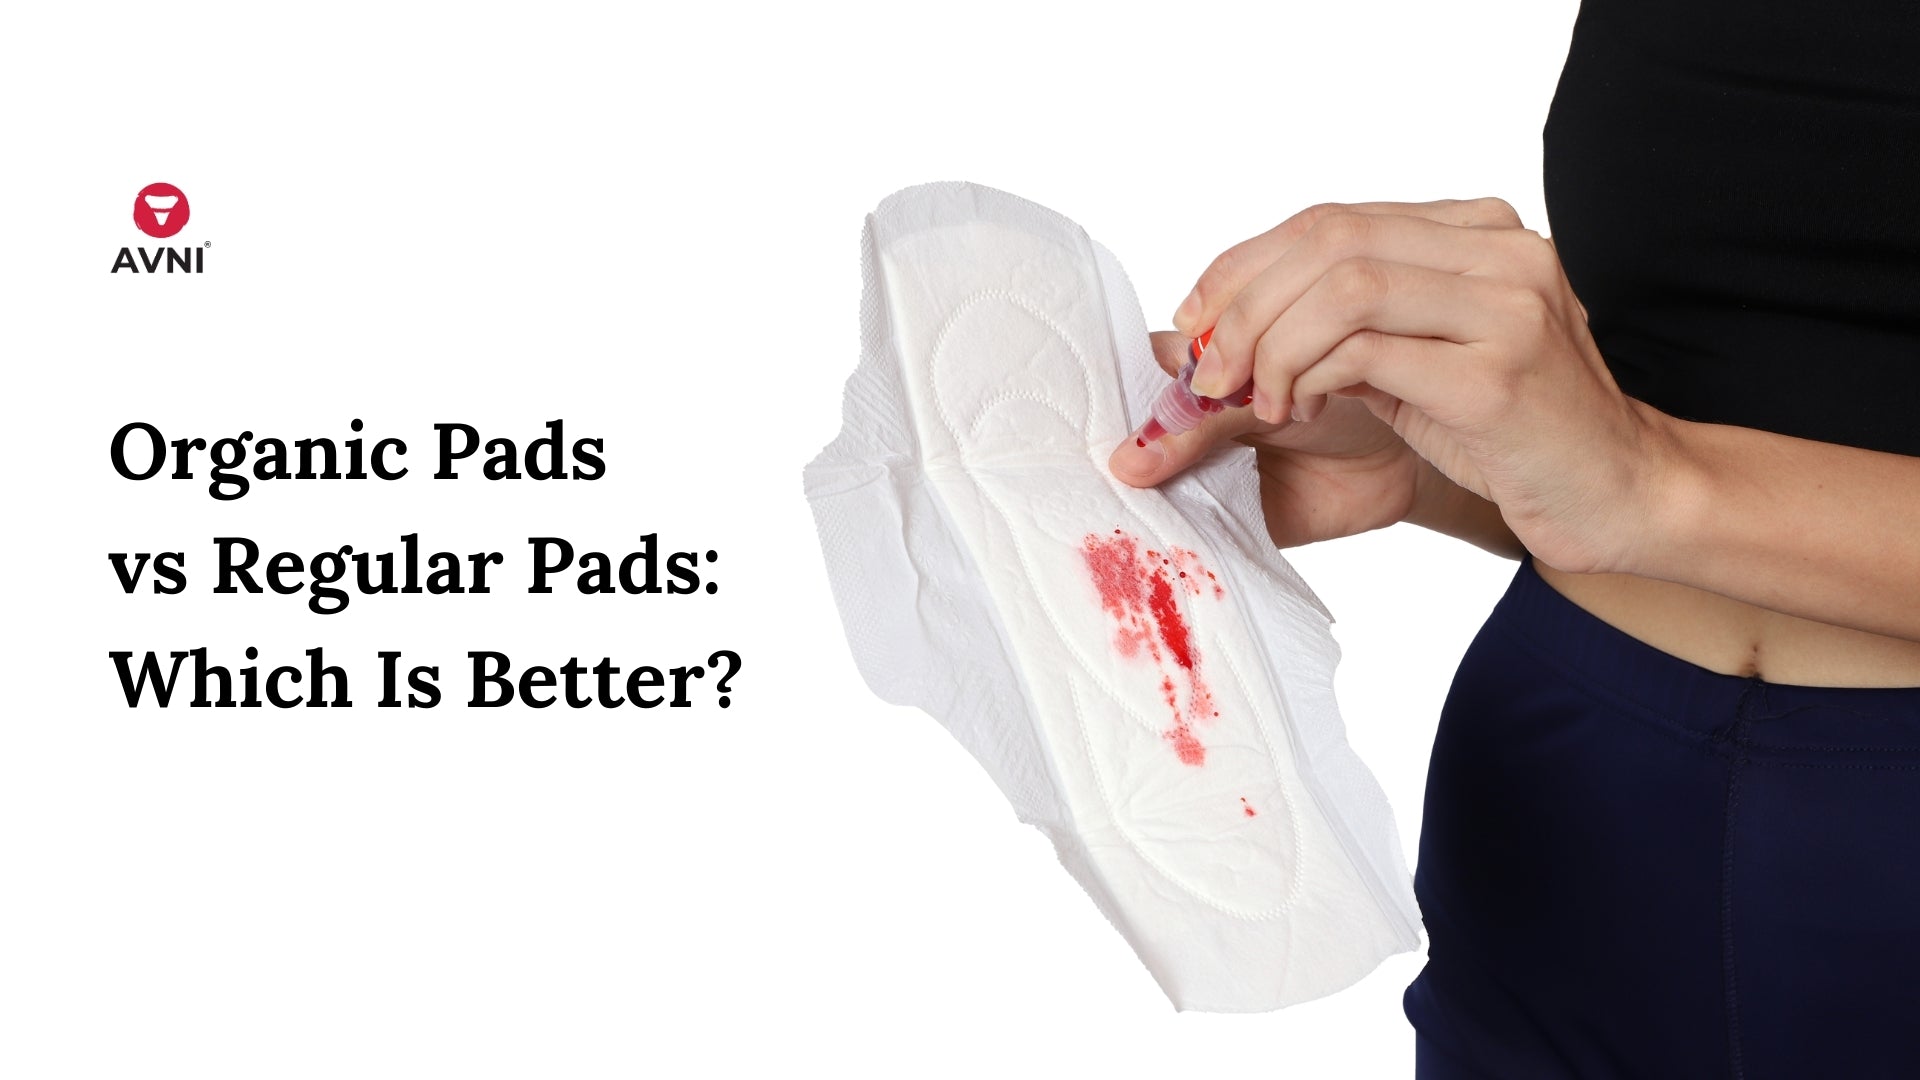 ORGANIC CHEMICAL FREE SANITARY PADS- HOW ARE THEY MADE & HEALTH